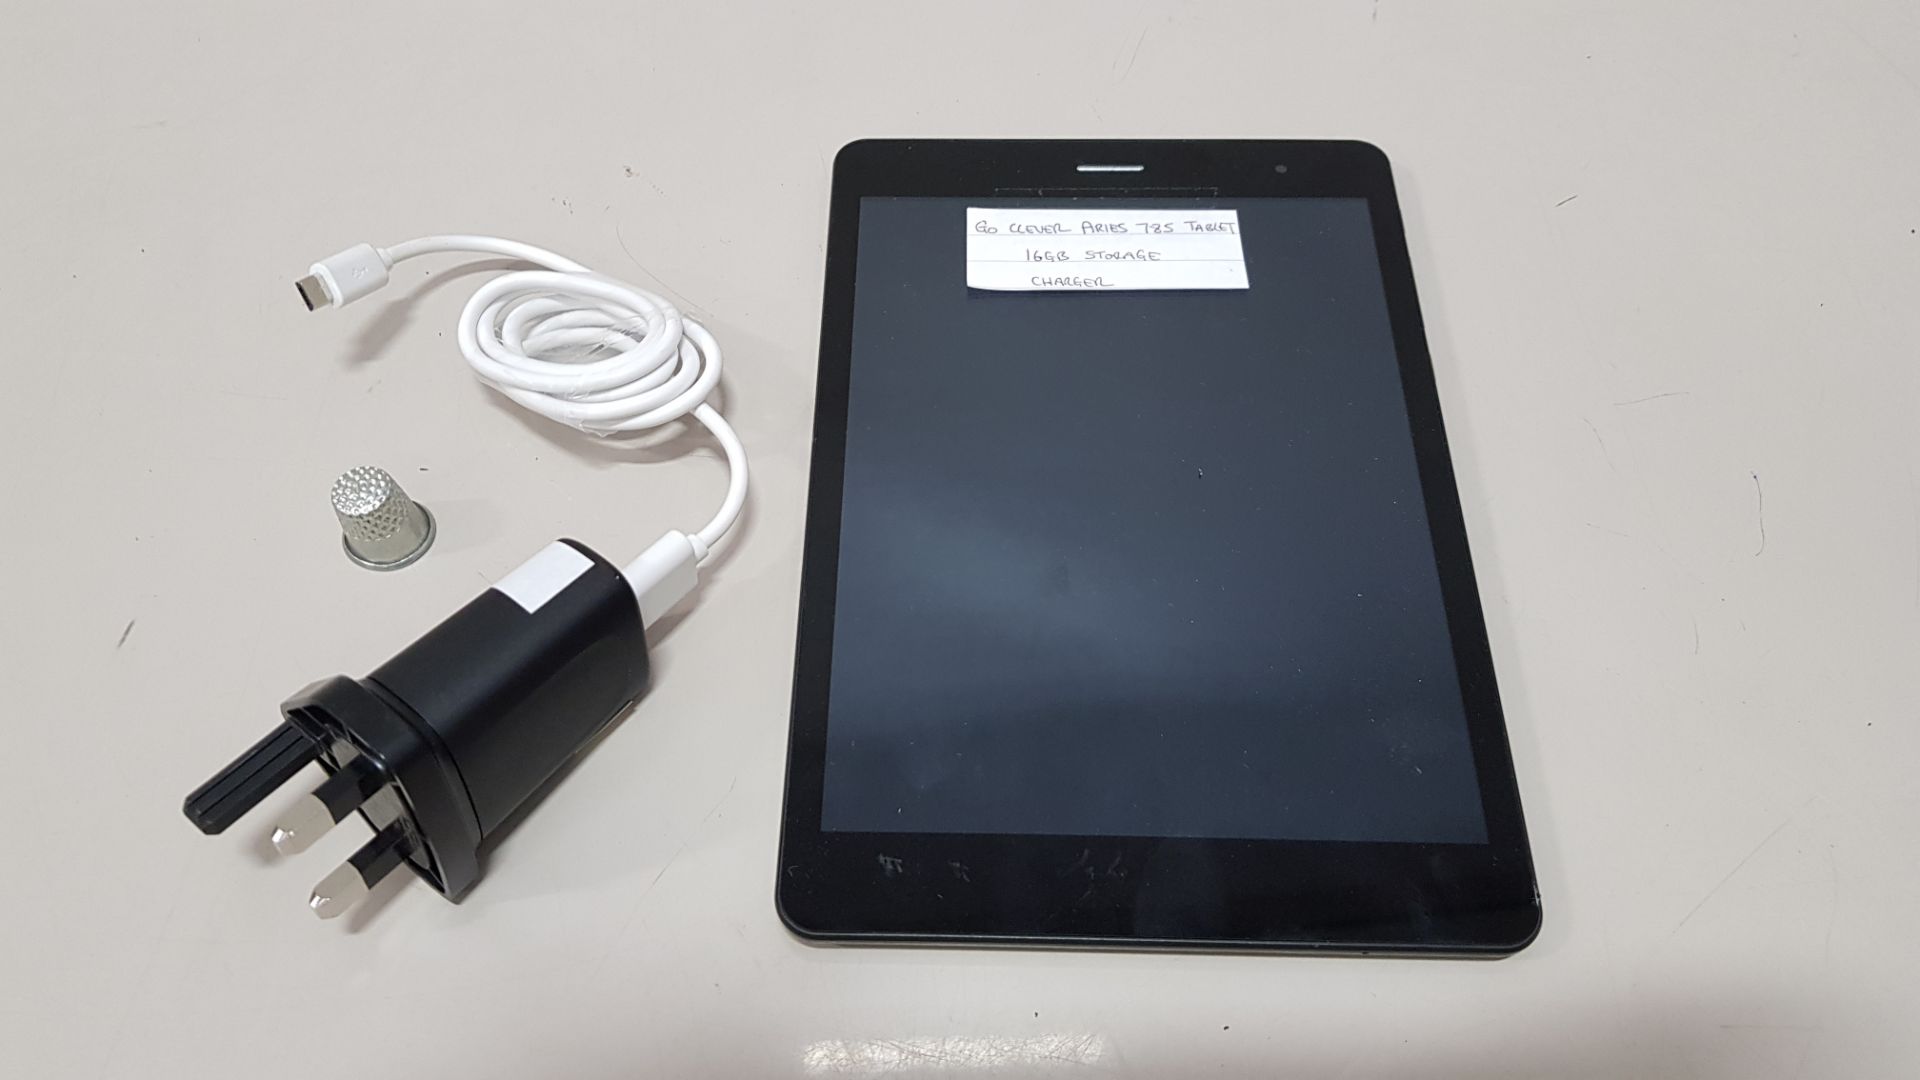 GO ARIES 785 TABLET 16GB STORAGE - WITH CHARGER